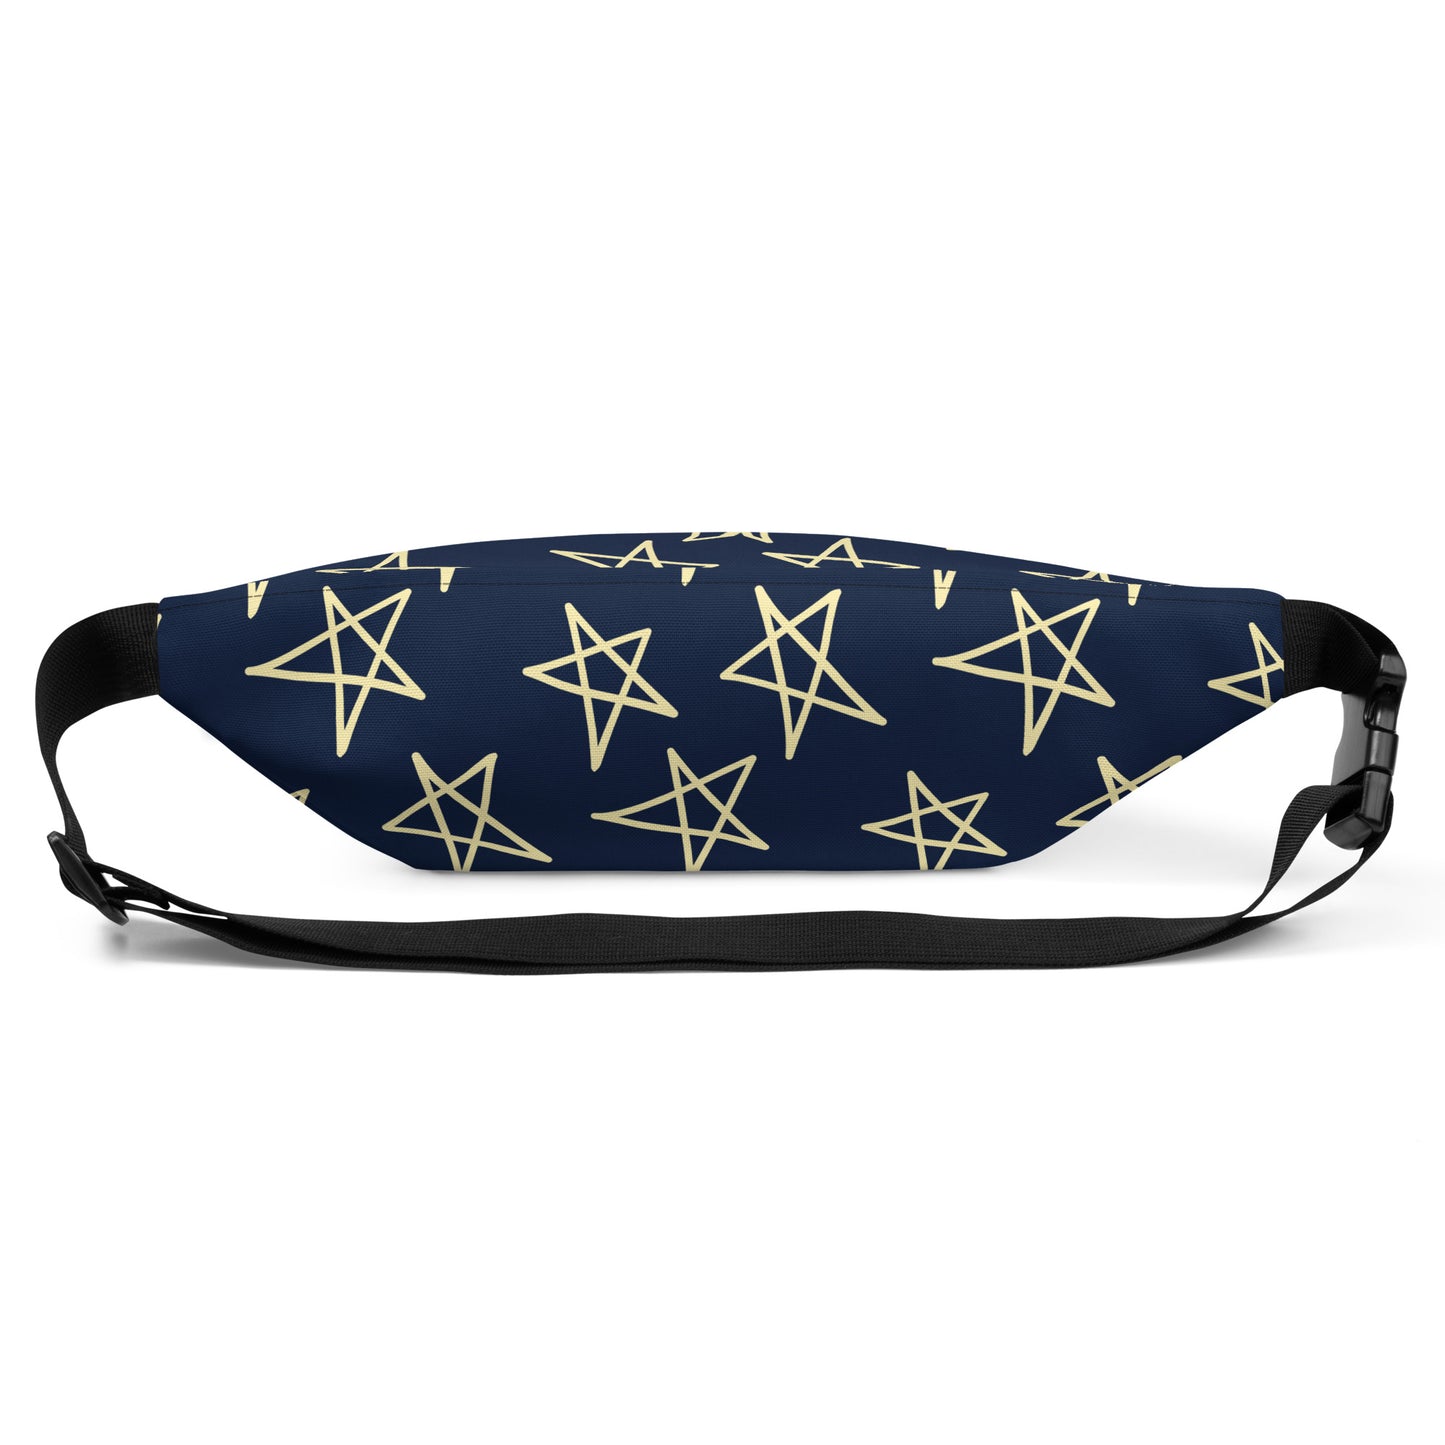 All Star Fanny Pack